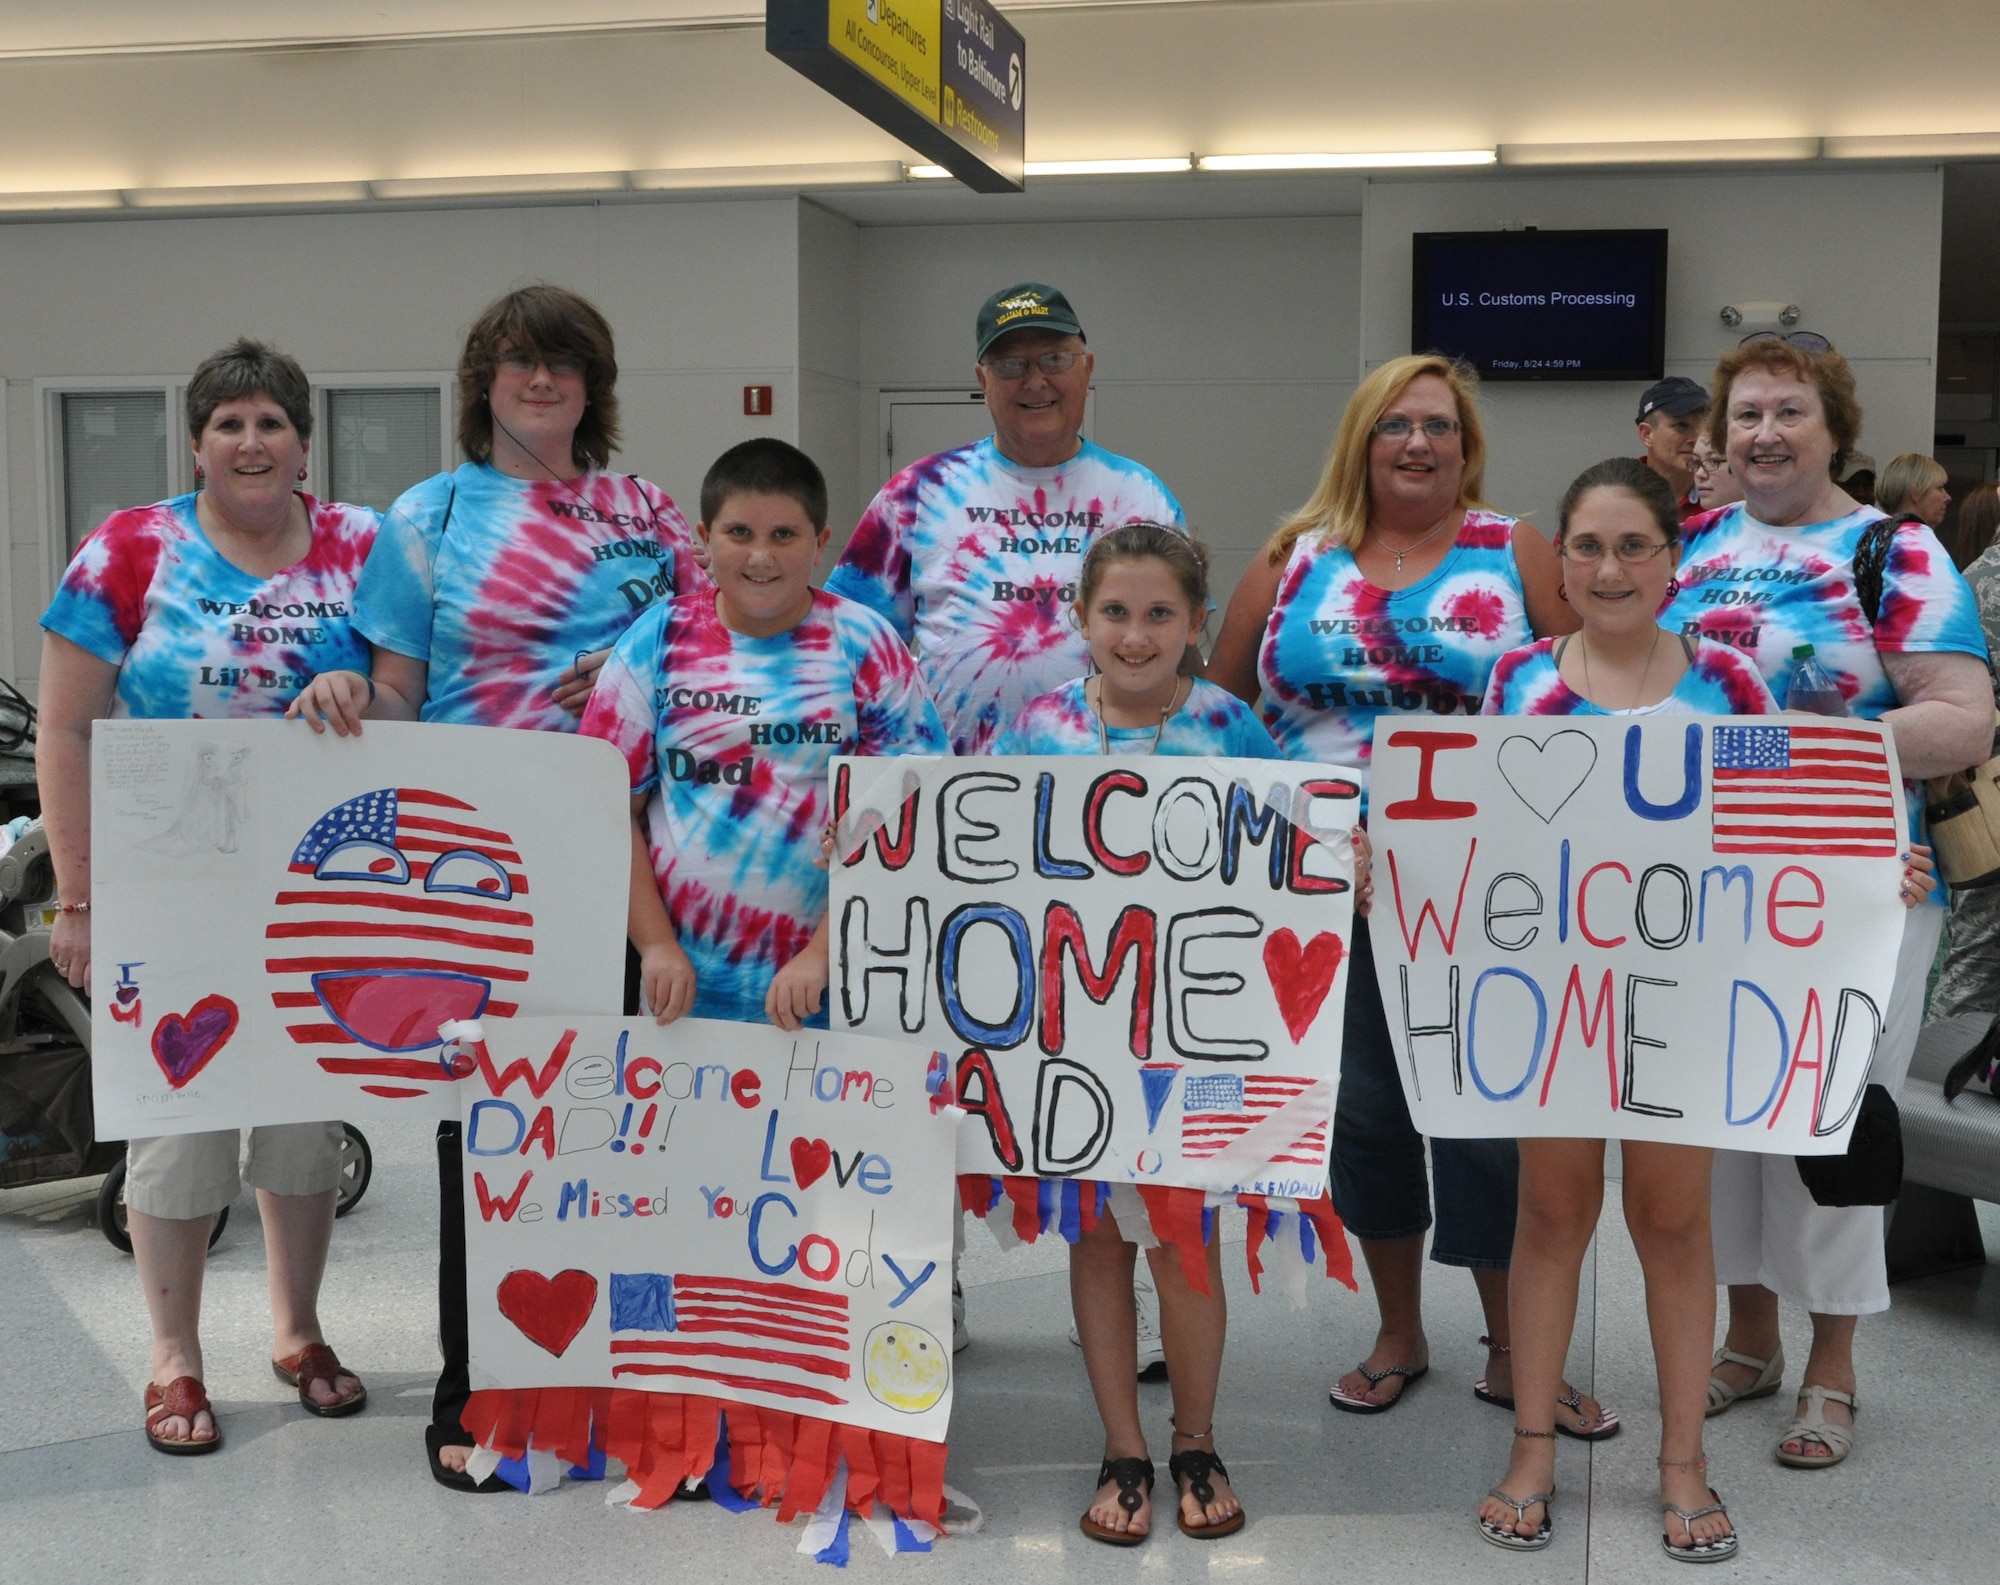 Family members of U.S. Air Force Chief Master Sgt. Boyd Clendenen, 69th Aerial Port Squadron, await his arrival at Baltimore-Washington International Thurgood Marshall Airport, Md., Aug. 24, 2012. The 69 APS welcomed home 15 troops who were returning from a six-month deployment to Afghanistan. (U.S. Air Force photo/ Senior Airman Katie Spencer)